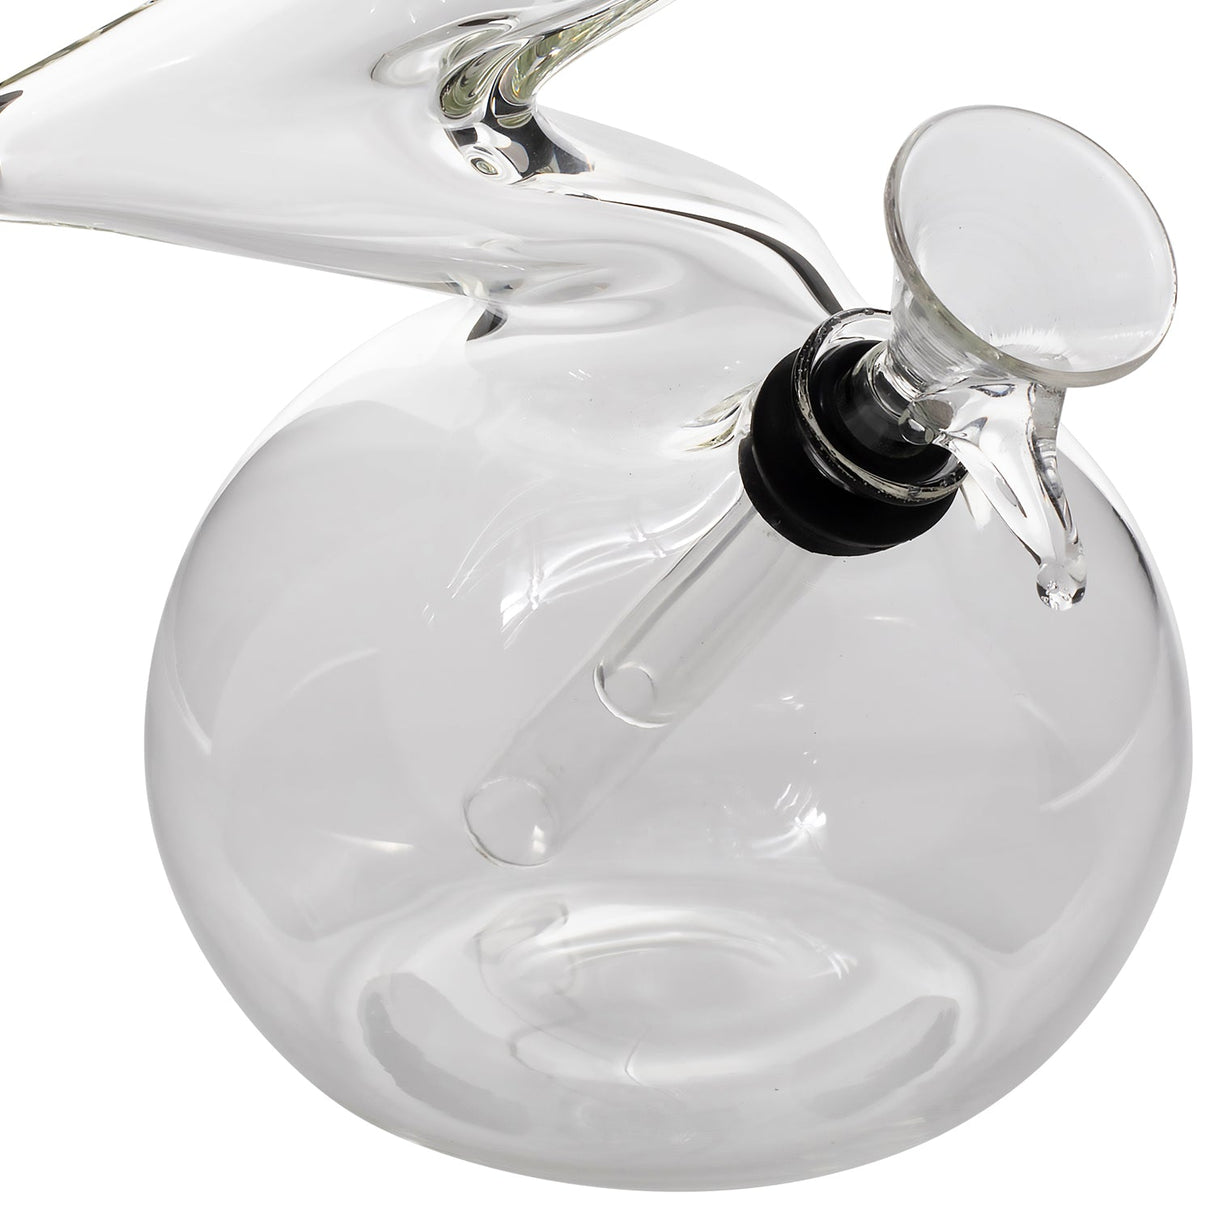 LA Pipes "Jacobs Ladder" Clear Zong Bong